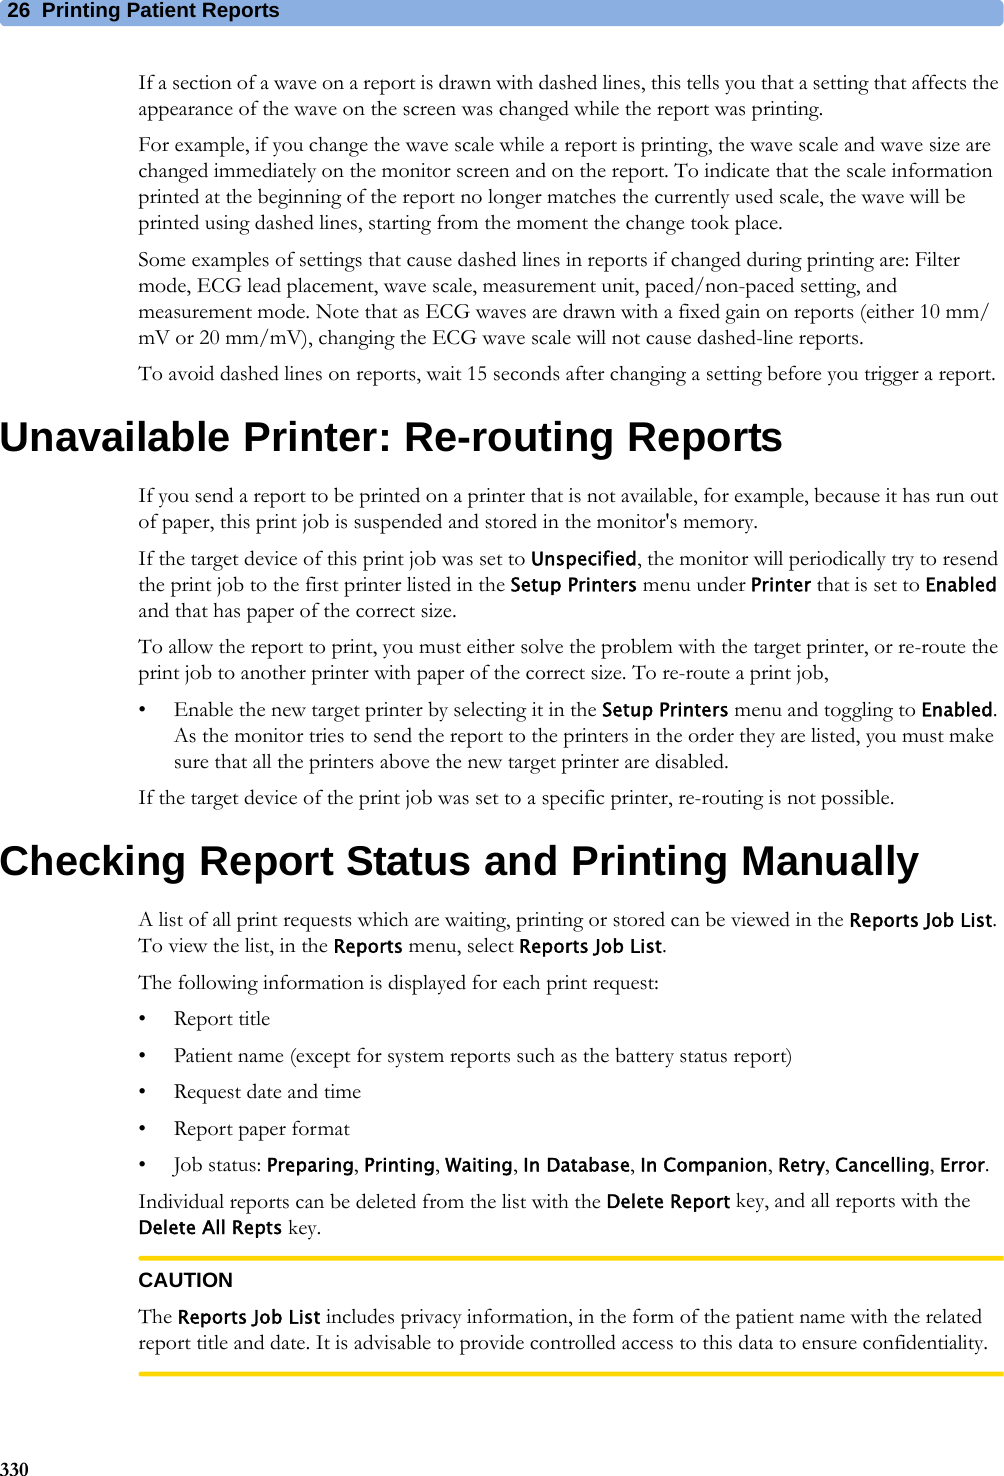 26 Printing Patient Reports330If a section of a wave on a report is drawn with dashed lines, this tells you that a setting that affects the appearance of the wave on the screen was changed while the report was printing.For example, if you change the wave scale while a report is printing, the wave scale and wave size are changed immediately on the monitor screen and on the report. To indicate that the scale information printed at the beginning of the report no longer matches the currently used scale, the wave will be printed using dashed lines, starting from the moment the change took place.Some examples of settings that cause dashed lines in reports if changed during printing are: Filter mode, ECG lead placement, wave scale, measurement unit, paced/non-paced setting, and measurement mode. Note that as ECG waves are drawn with a fixed gain on reports (either 10 mm/mV or 20 mm/mV), changing the ECG wave scale will not cause dashed-line reports.To avoid dashed lines on reports, wait 15 seconds after changing a setting before you trigger a report.Unavailable Printer: Re-routing ReportsIf you send a report to be printed on a printer that is not available, for example, because it has run out of paper, this print job is suspended and stored in the monitor&apos;s memory.If the target device of this print job was set to Unspecified, the monitor will periodically try to resend the print job to the first printer listed in the Setup Printers menu under Printer that is set to Enabled and that has paper of the correct size.To allow the report to print, you must either solve the problem with the target printer, or re-route the print job to another printer with paper of the correct size. To re-route a print job,• Enable the new target printer by selecting it in the Setup Printers menu and toggling to Enabled. As the monitor tries to send the report to the printers in the order they are listed, you must make sure that all the printers above the new target printer are disabled.If the target device of the print job was set to a specific printer, re-routing is not possible.Checking Report Status and Printing ManuallyA list of all print requests which are waiting, printing or stored can be viewed in the Reports Job List. To view the list, in the Reports menu, select Reports Job List.The following information is displayed for each print request:• Report title• Patient name (except for system reports such as the battery status report)• Request date and time• Report paper format•Job status: Preparing, Printing, Waiting, In Database, In Companion, Retry, Cancelling, Error.Individual reports can be deleted from the list with the Delete Report key, and all reports with the Delete All Repts key.CAUTIONThe Reports Job List includes privacy information, in the form of the patient name with the related report title and date. It is advisable to provide controlled access to this data to ensure confidentiality.